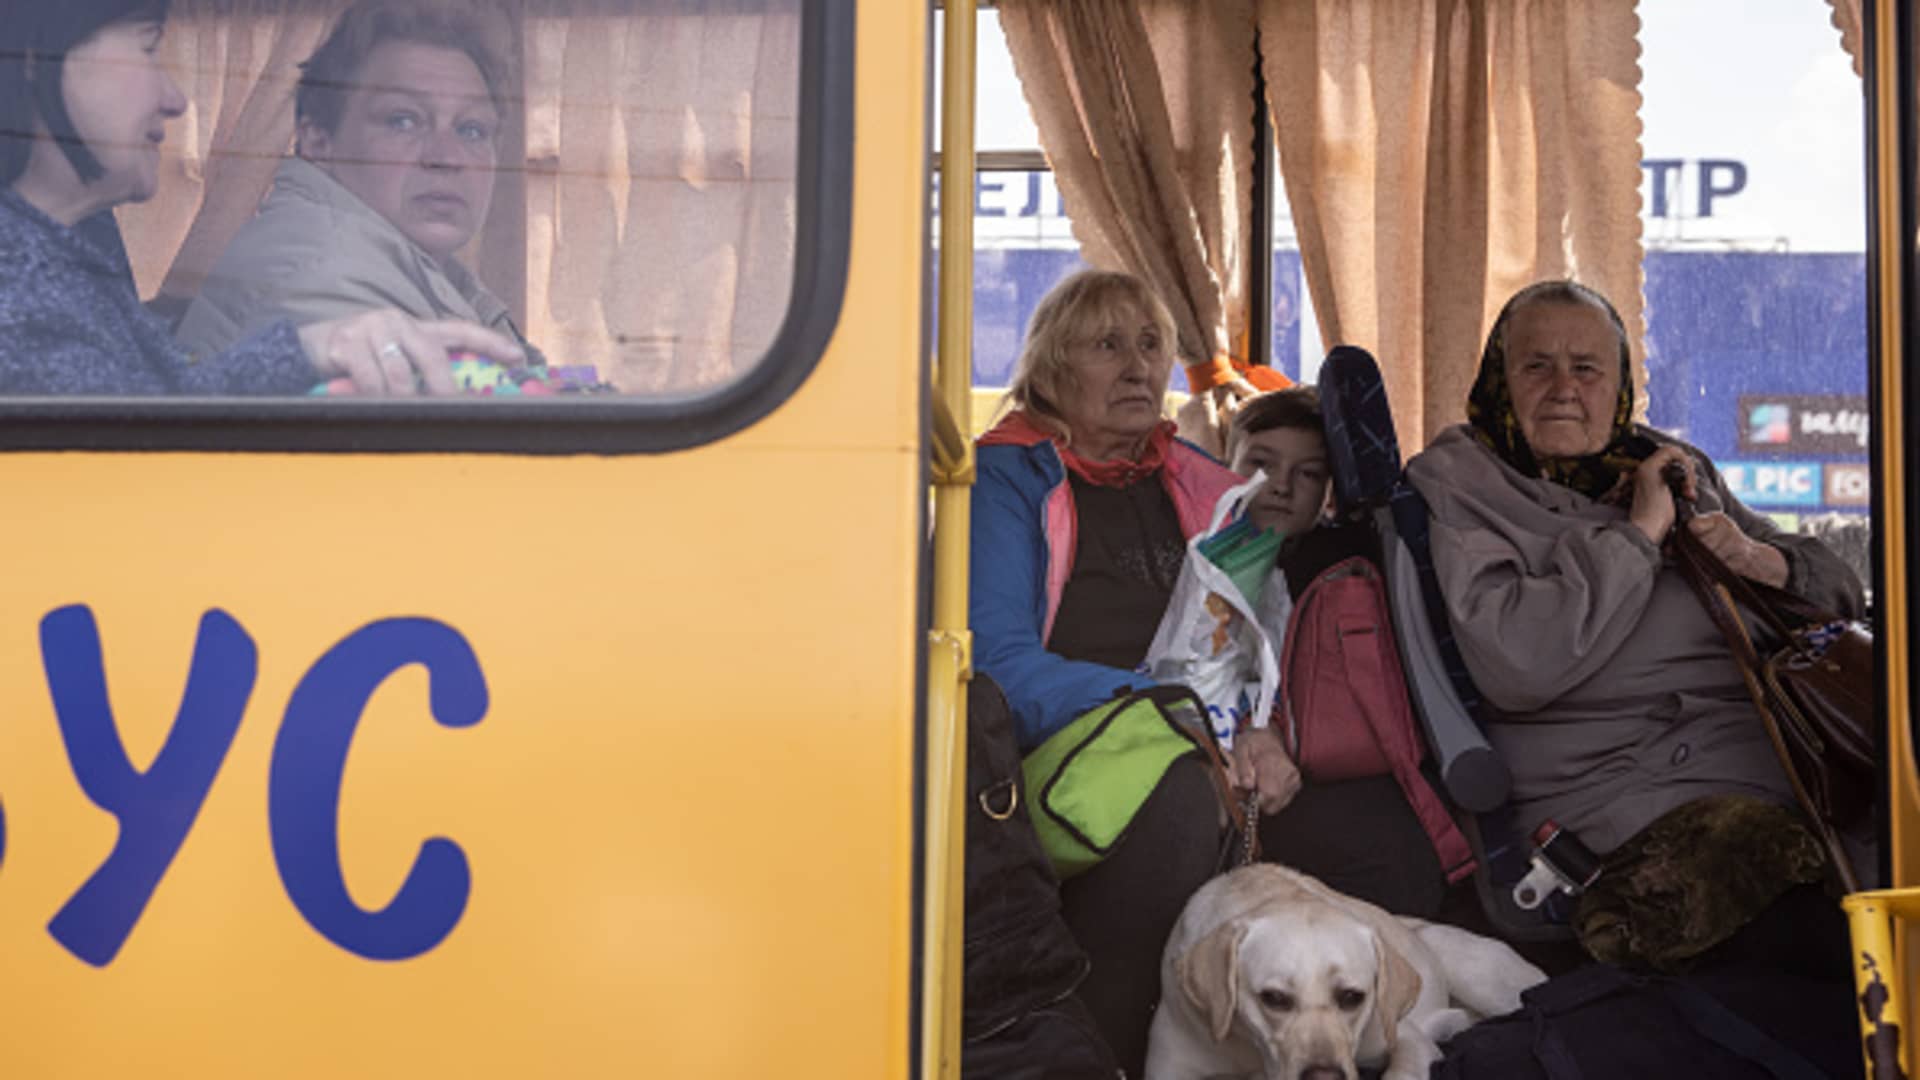 Women from the frontline town of Orikhiv wait on a bus after arriving at an evacuation point for people fleeing Mariupol, Melitopol and the surrounding towns under Russian control on May 02, 2022 in Zaporizhzhia, Ukraine.